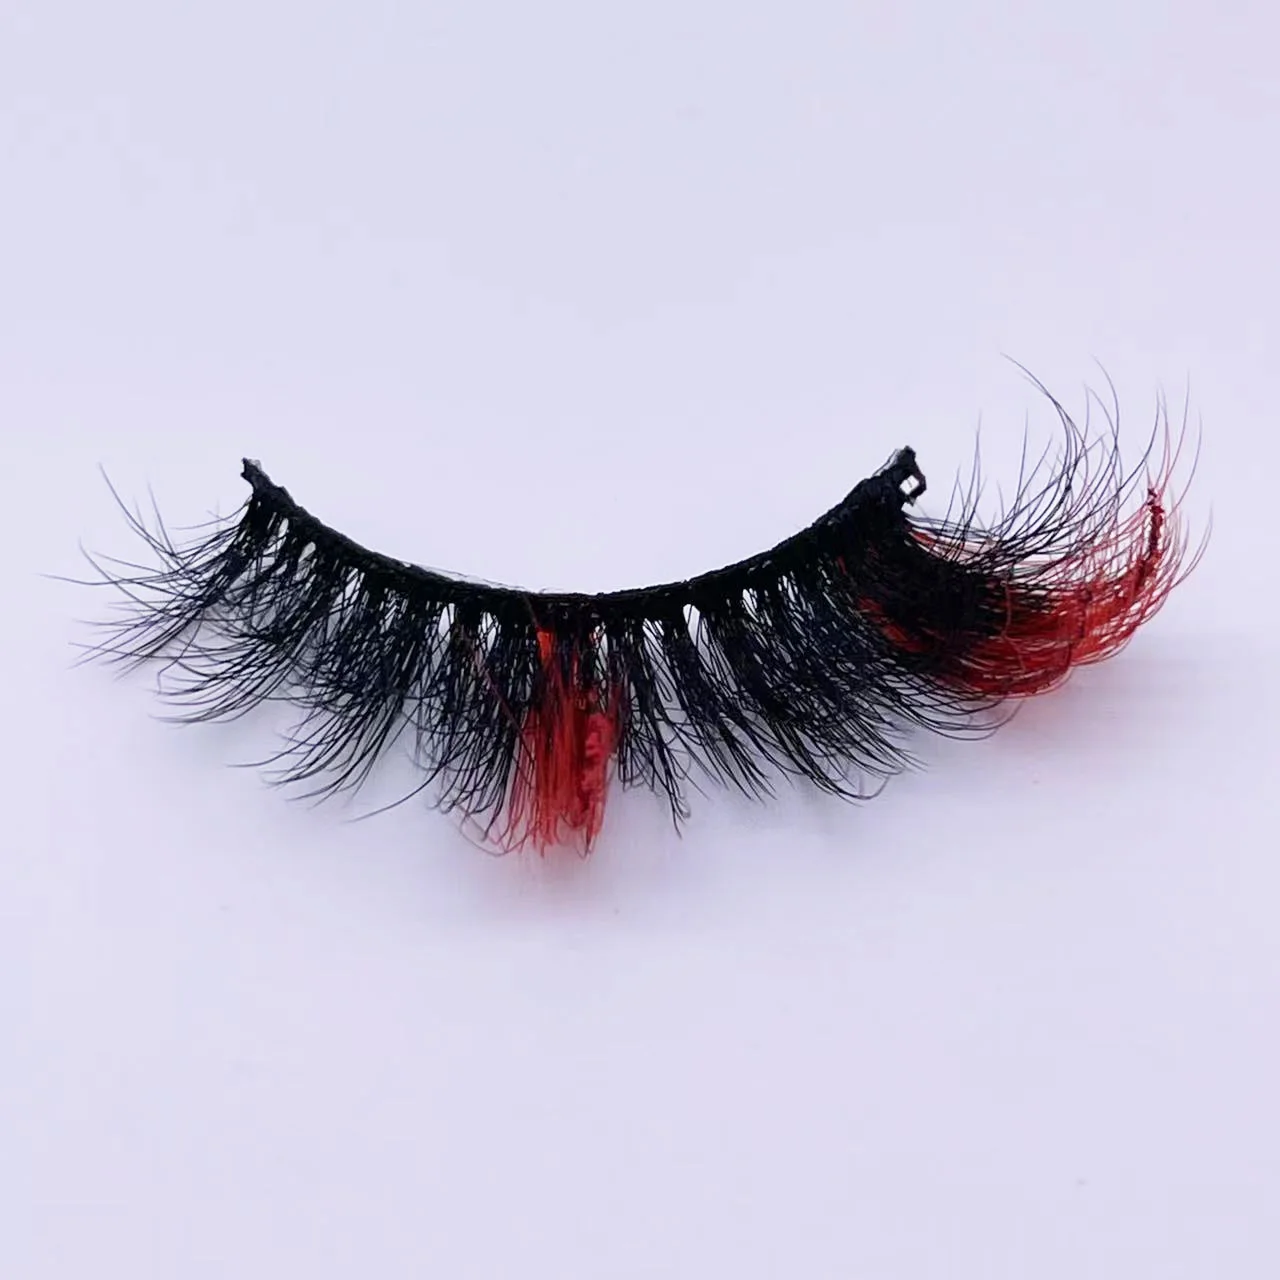 Hbzgtlad Colored Lashes Glitter Mink 15mm -20mm Fluffy Color Streaks Cosplay Makeup Beauty Eyelashes -Outlet Maid Outfit Store S4b4e7327480049beb277703fe90e2aa0W.jpg